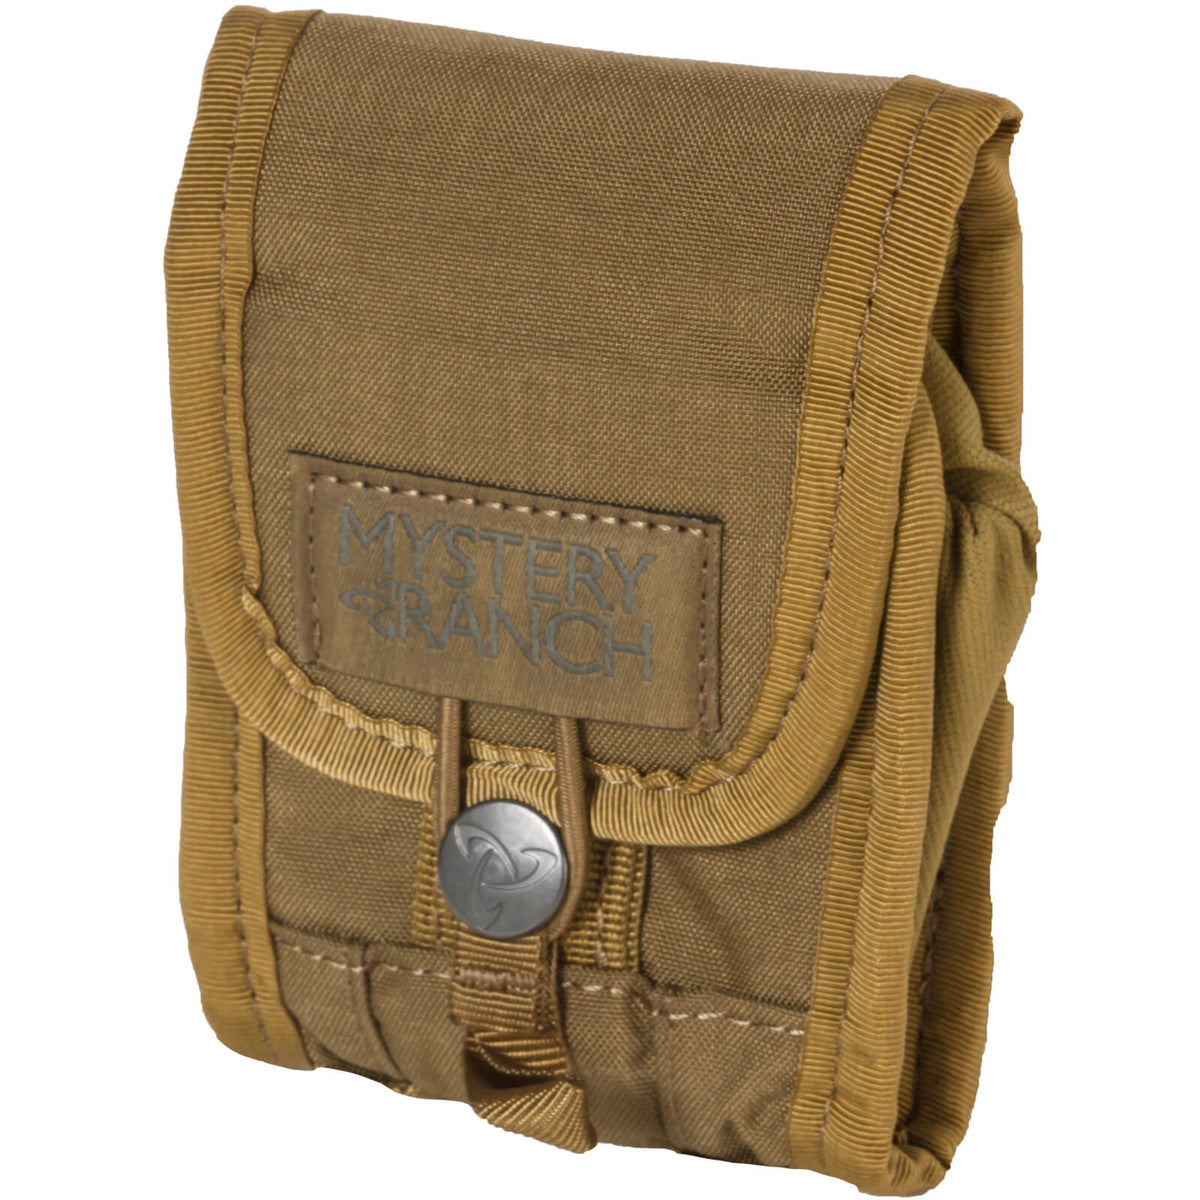 Mystery Ranch Range Finder Holster - Coyote - Coyote - Mansfield Hunting & Fishing - Products to prepare for Corona Virus